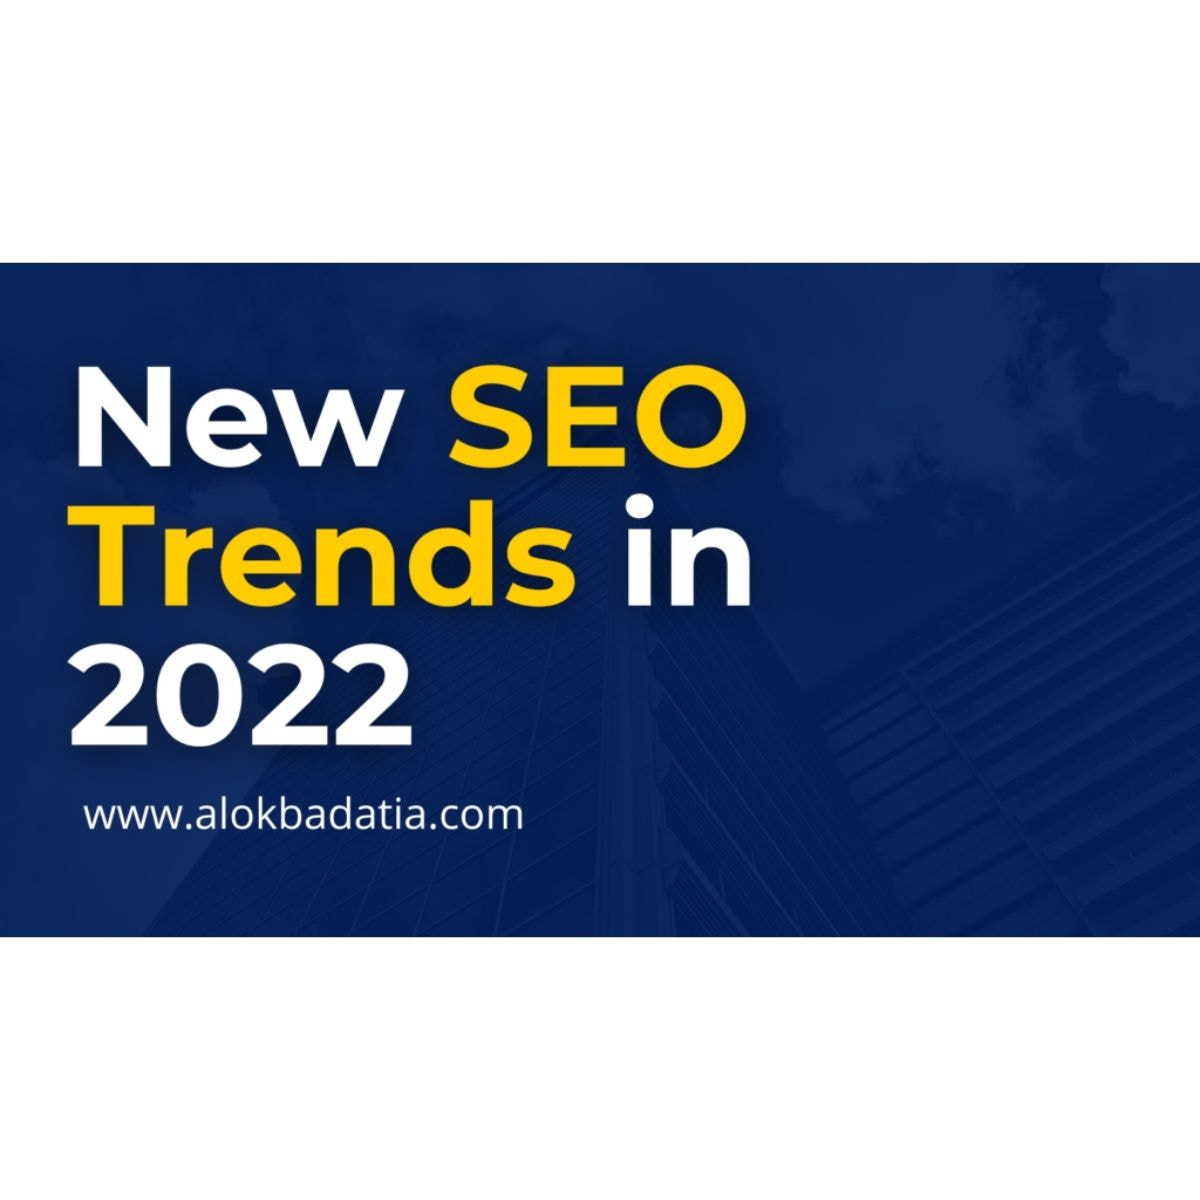 New SEO Trends for 2022